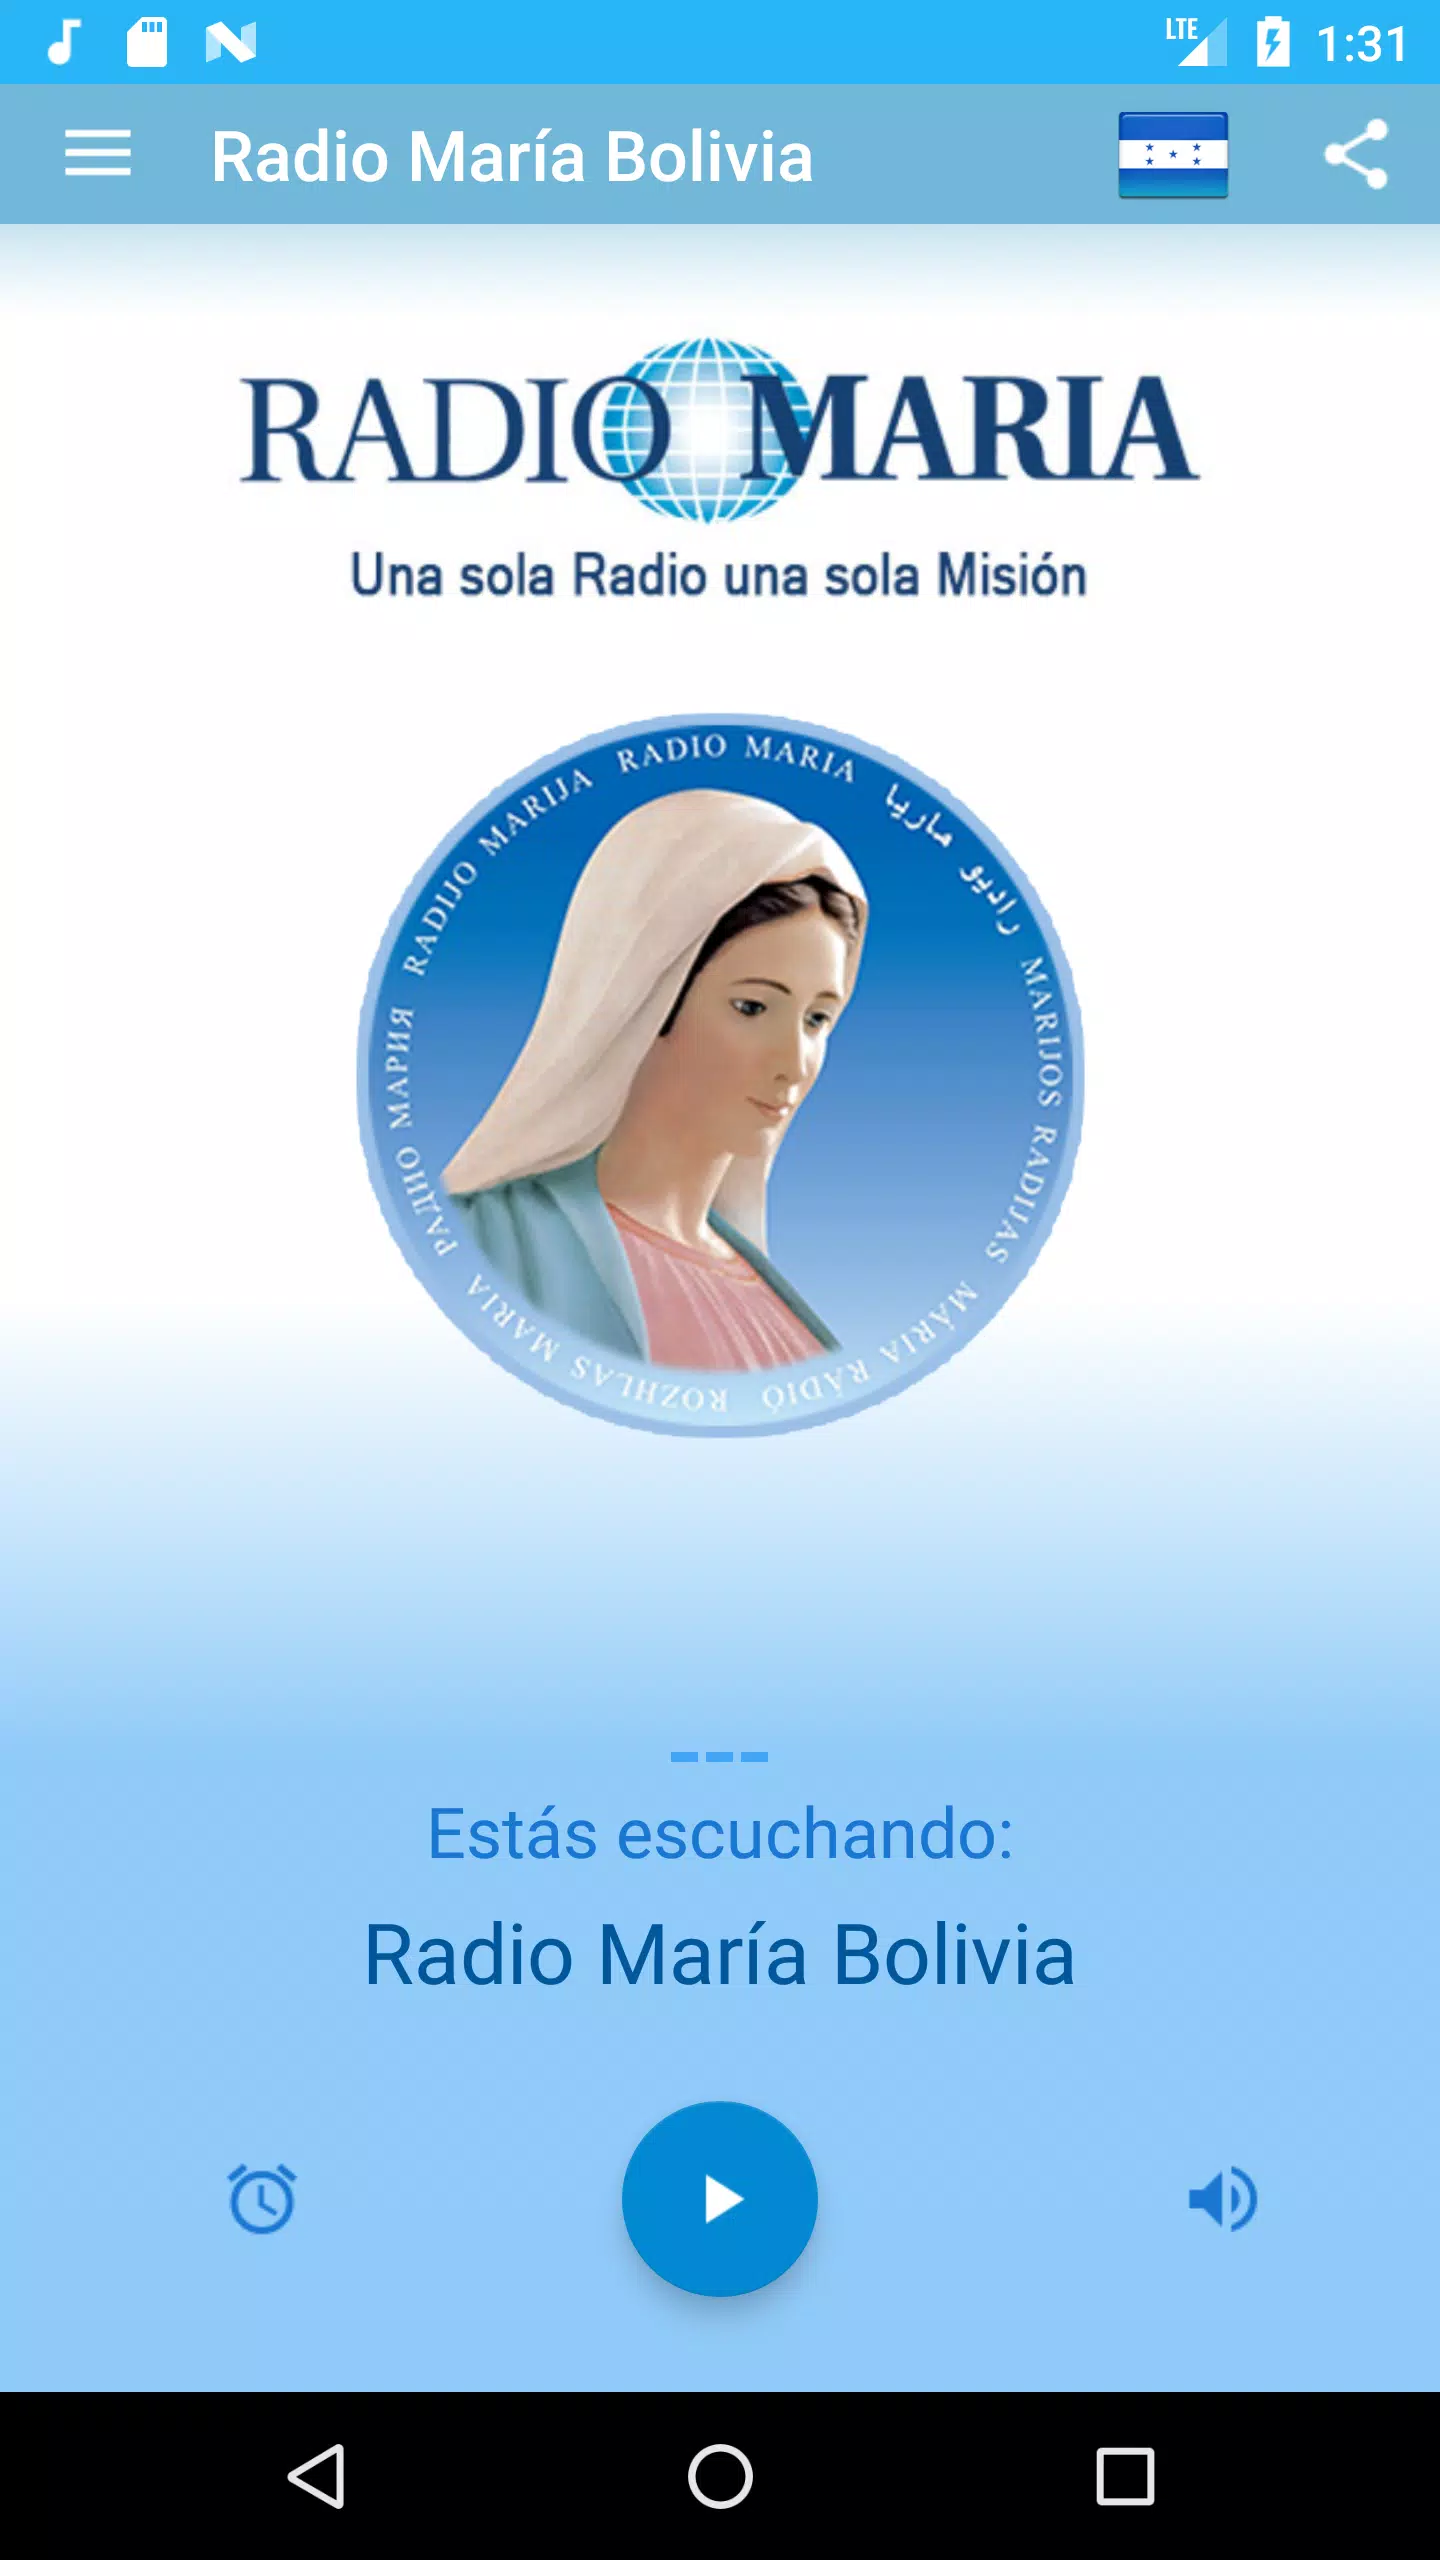 Radio Maria Bolivia for Android - APK Download